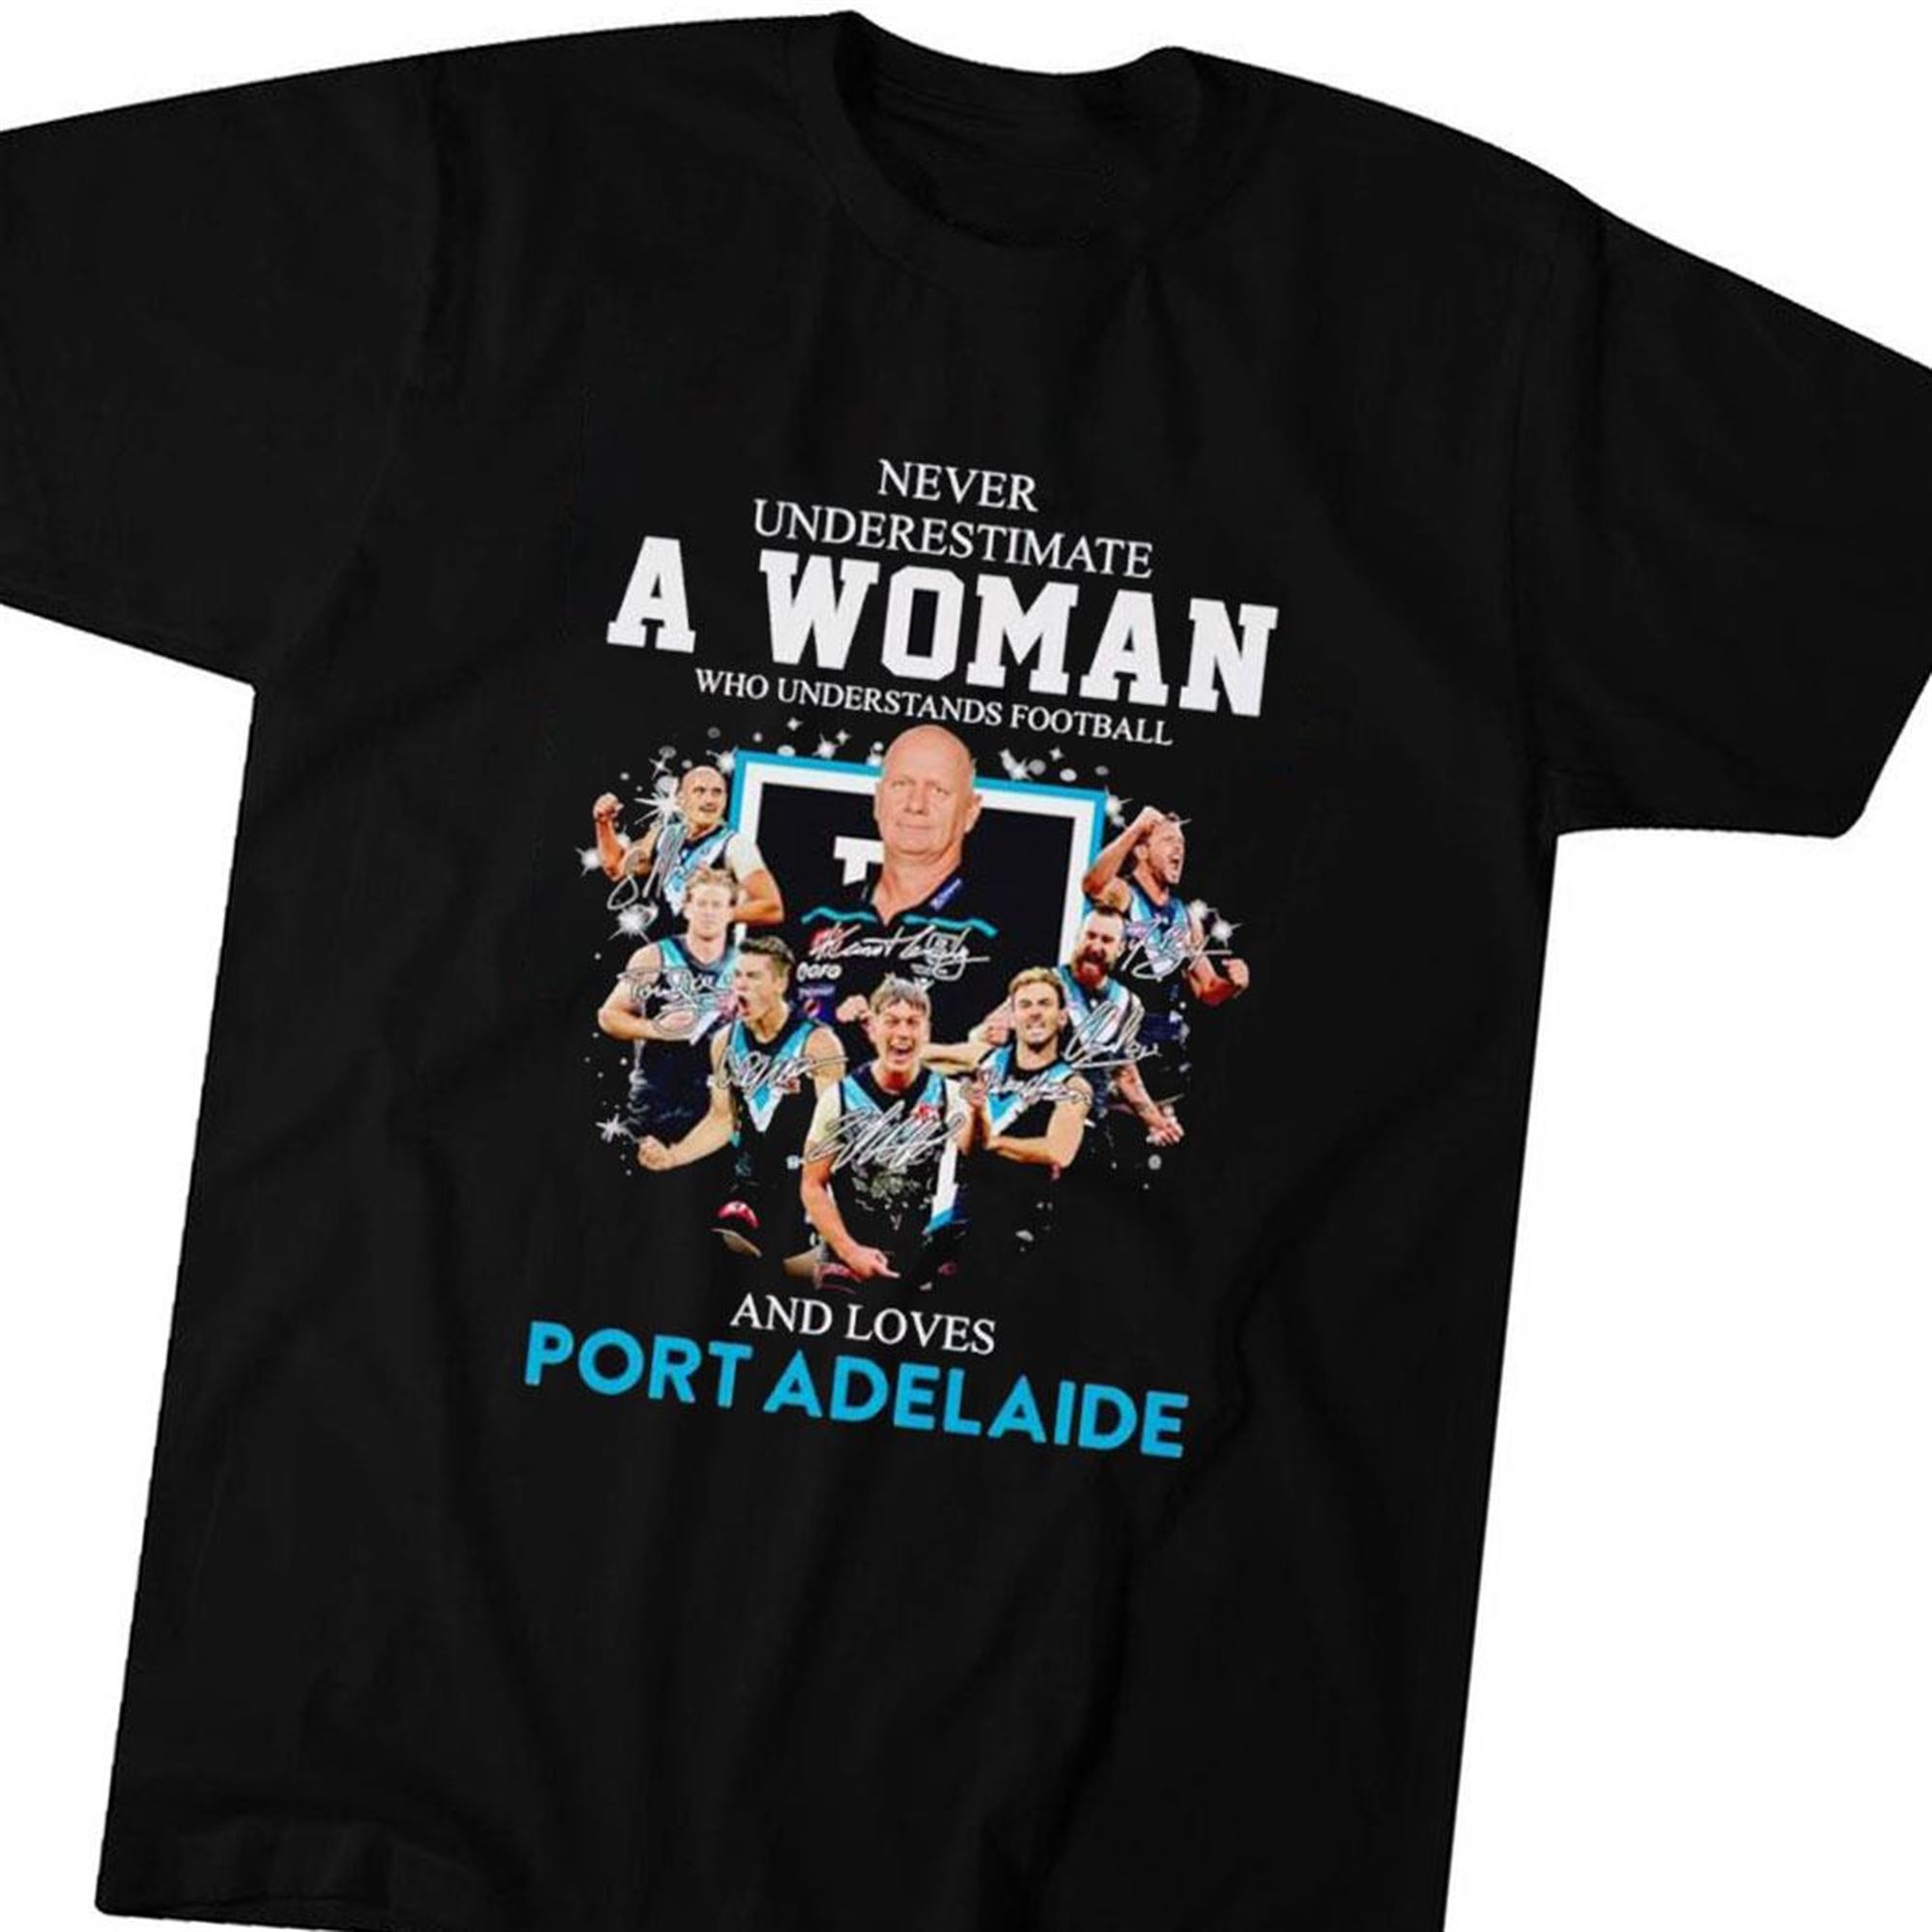 Port Adelaide Never Underestimate A Woman Who Understands Football And Loves Shirt Ladies Tee